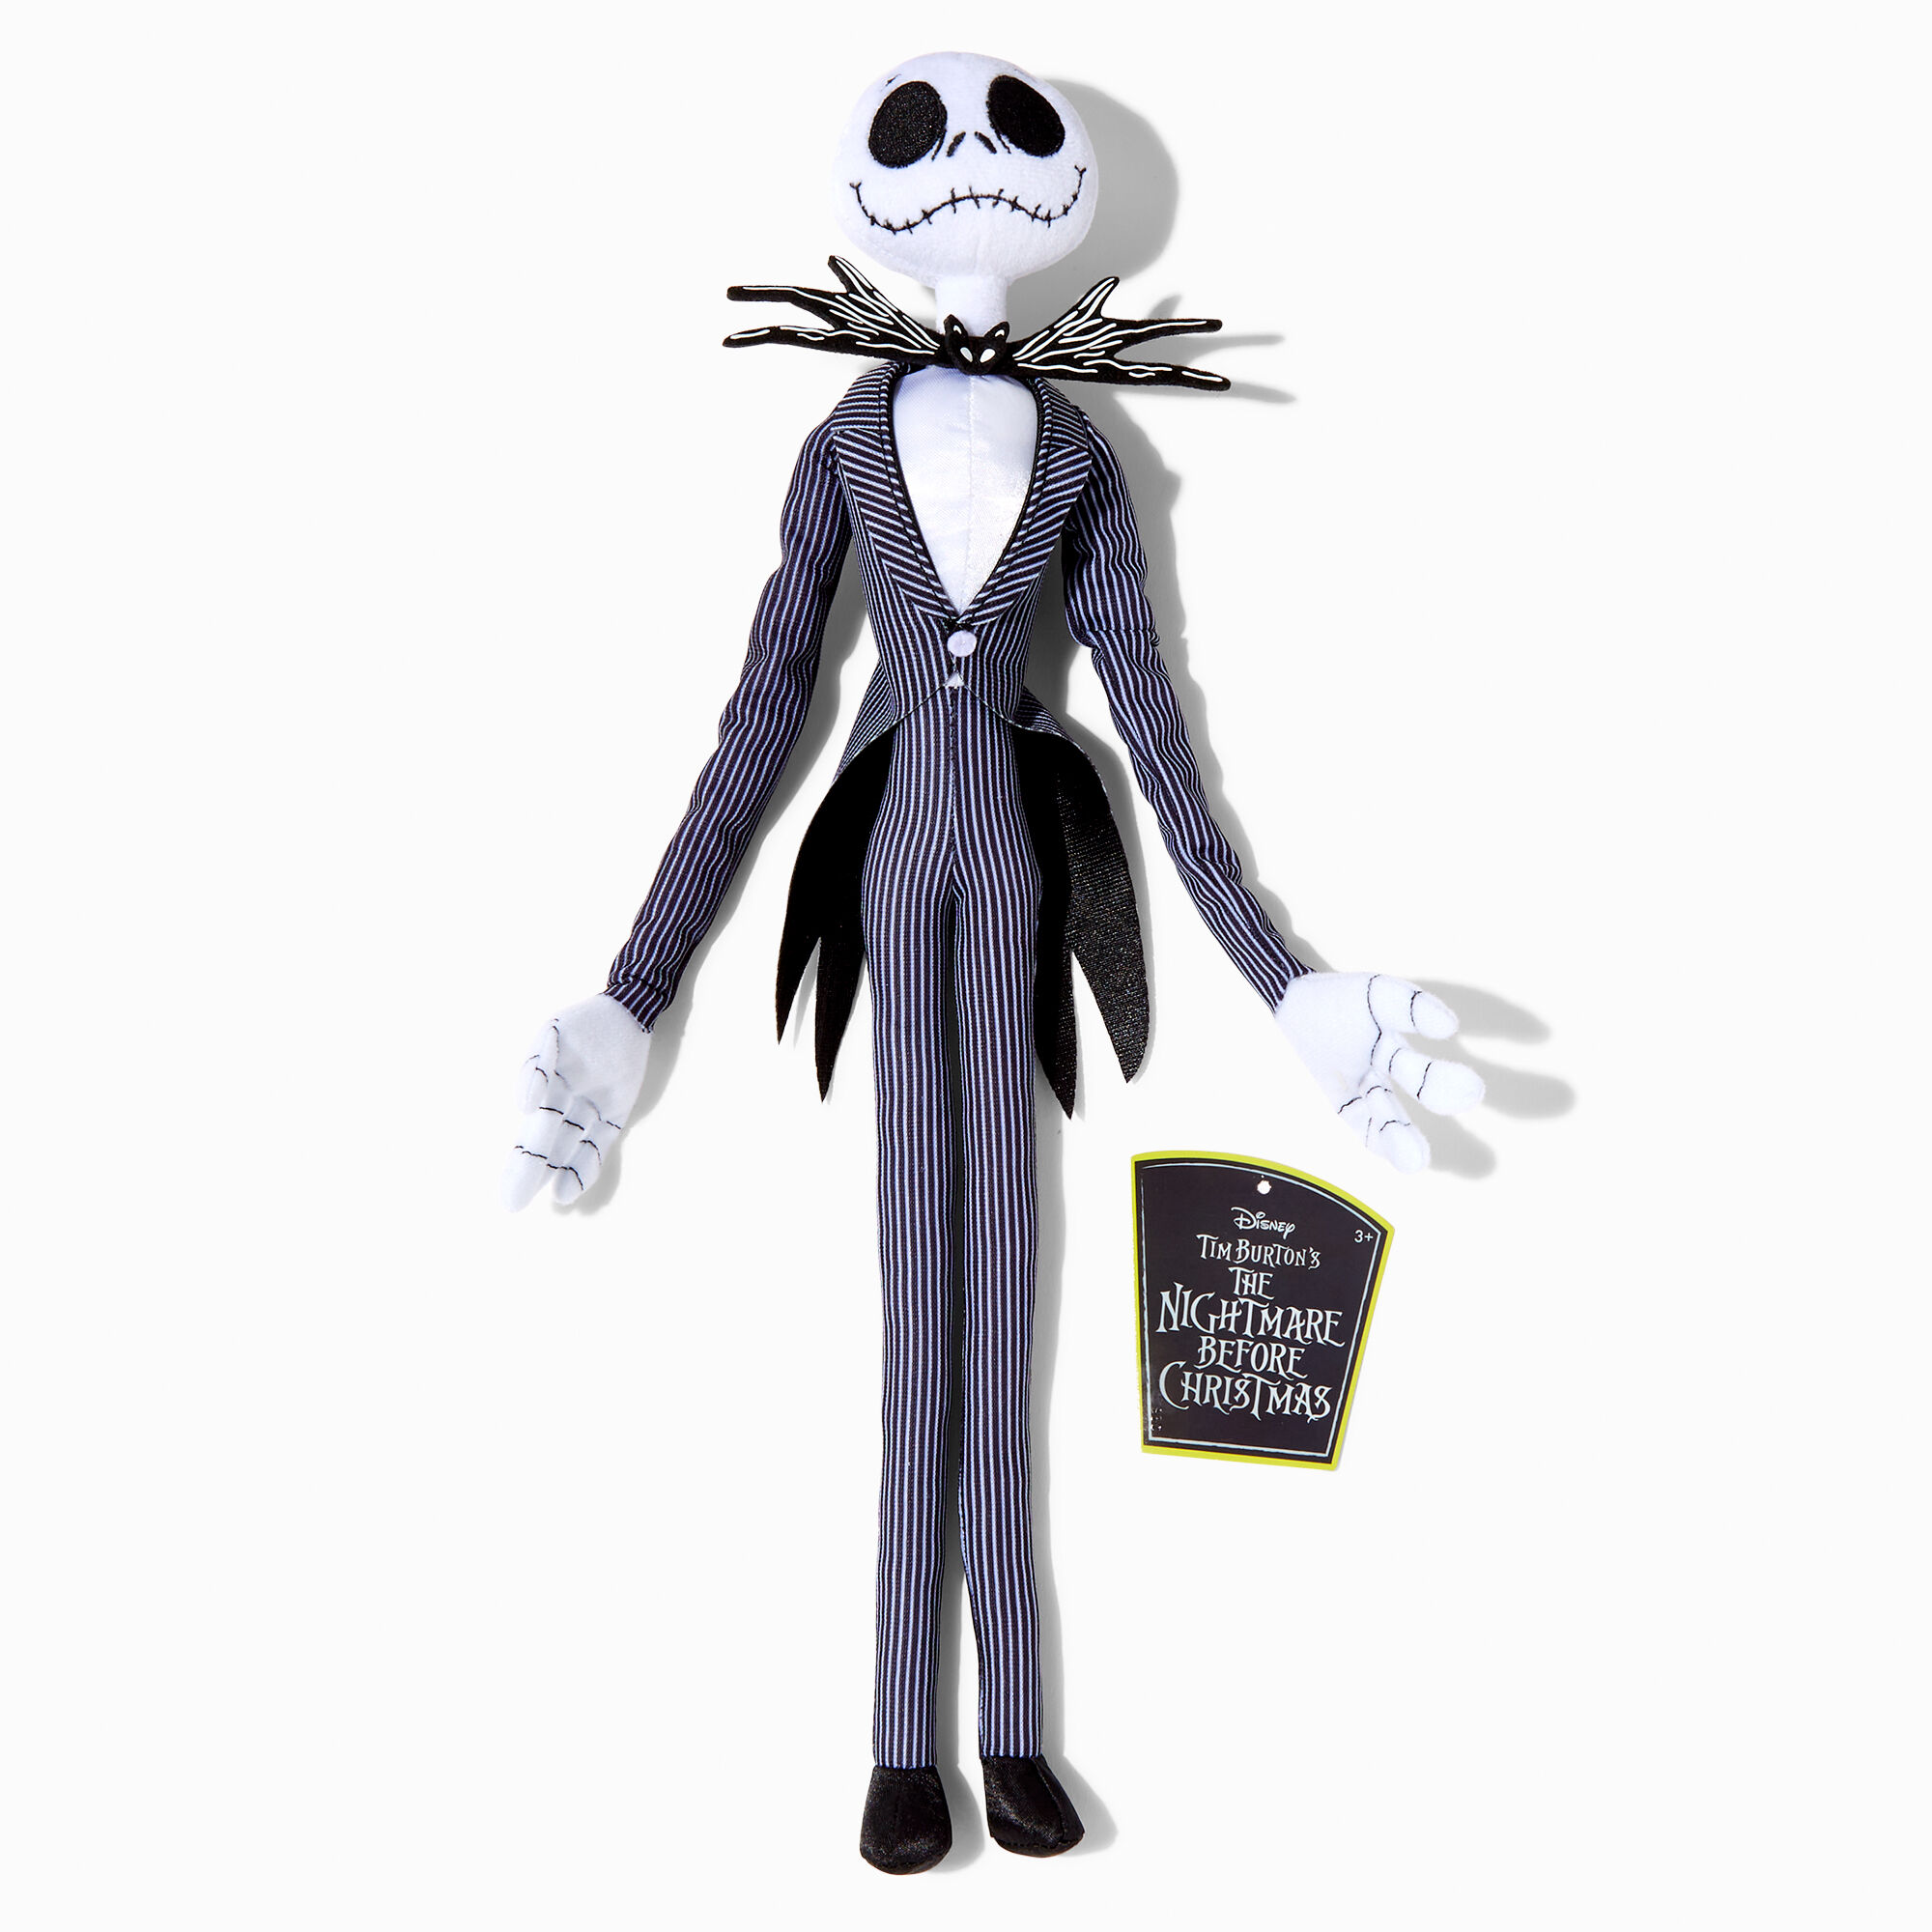 Celebrate “Valloween” with Items Inspired by Jack and Sally's Love - D23